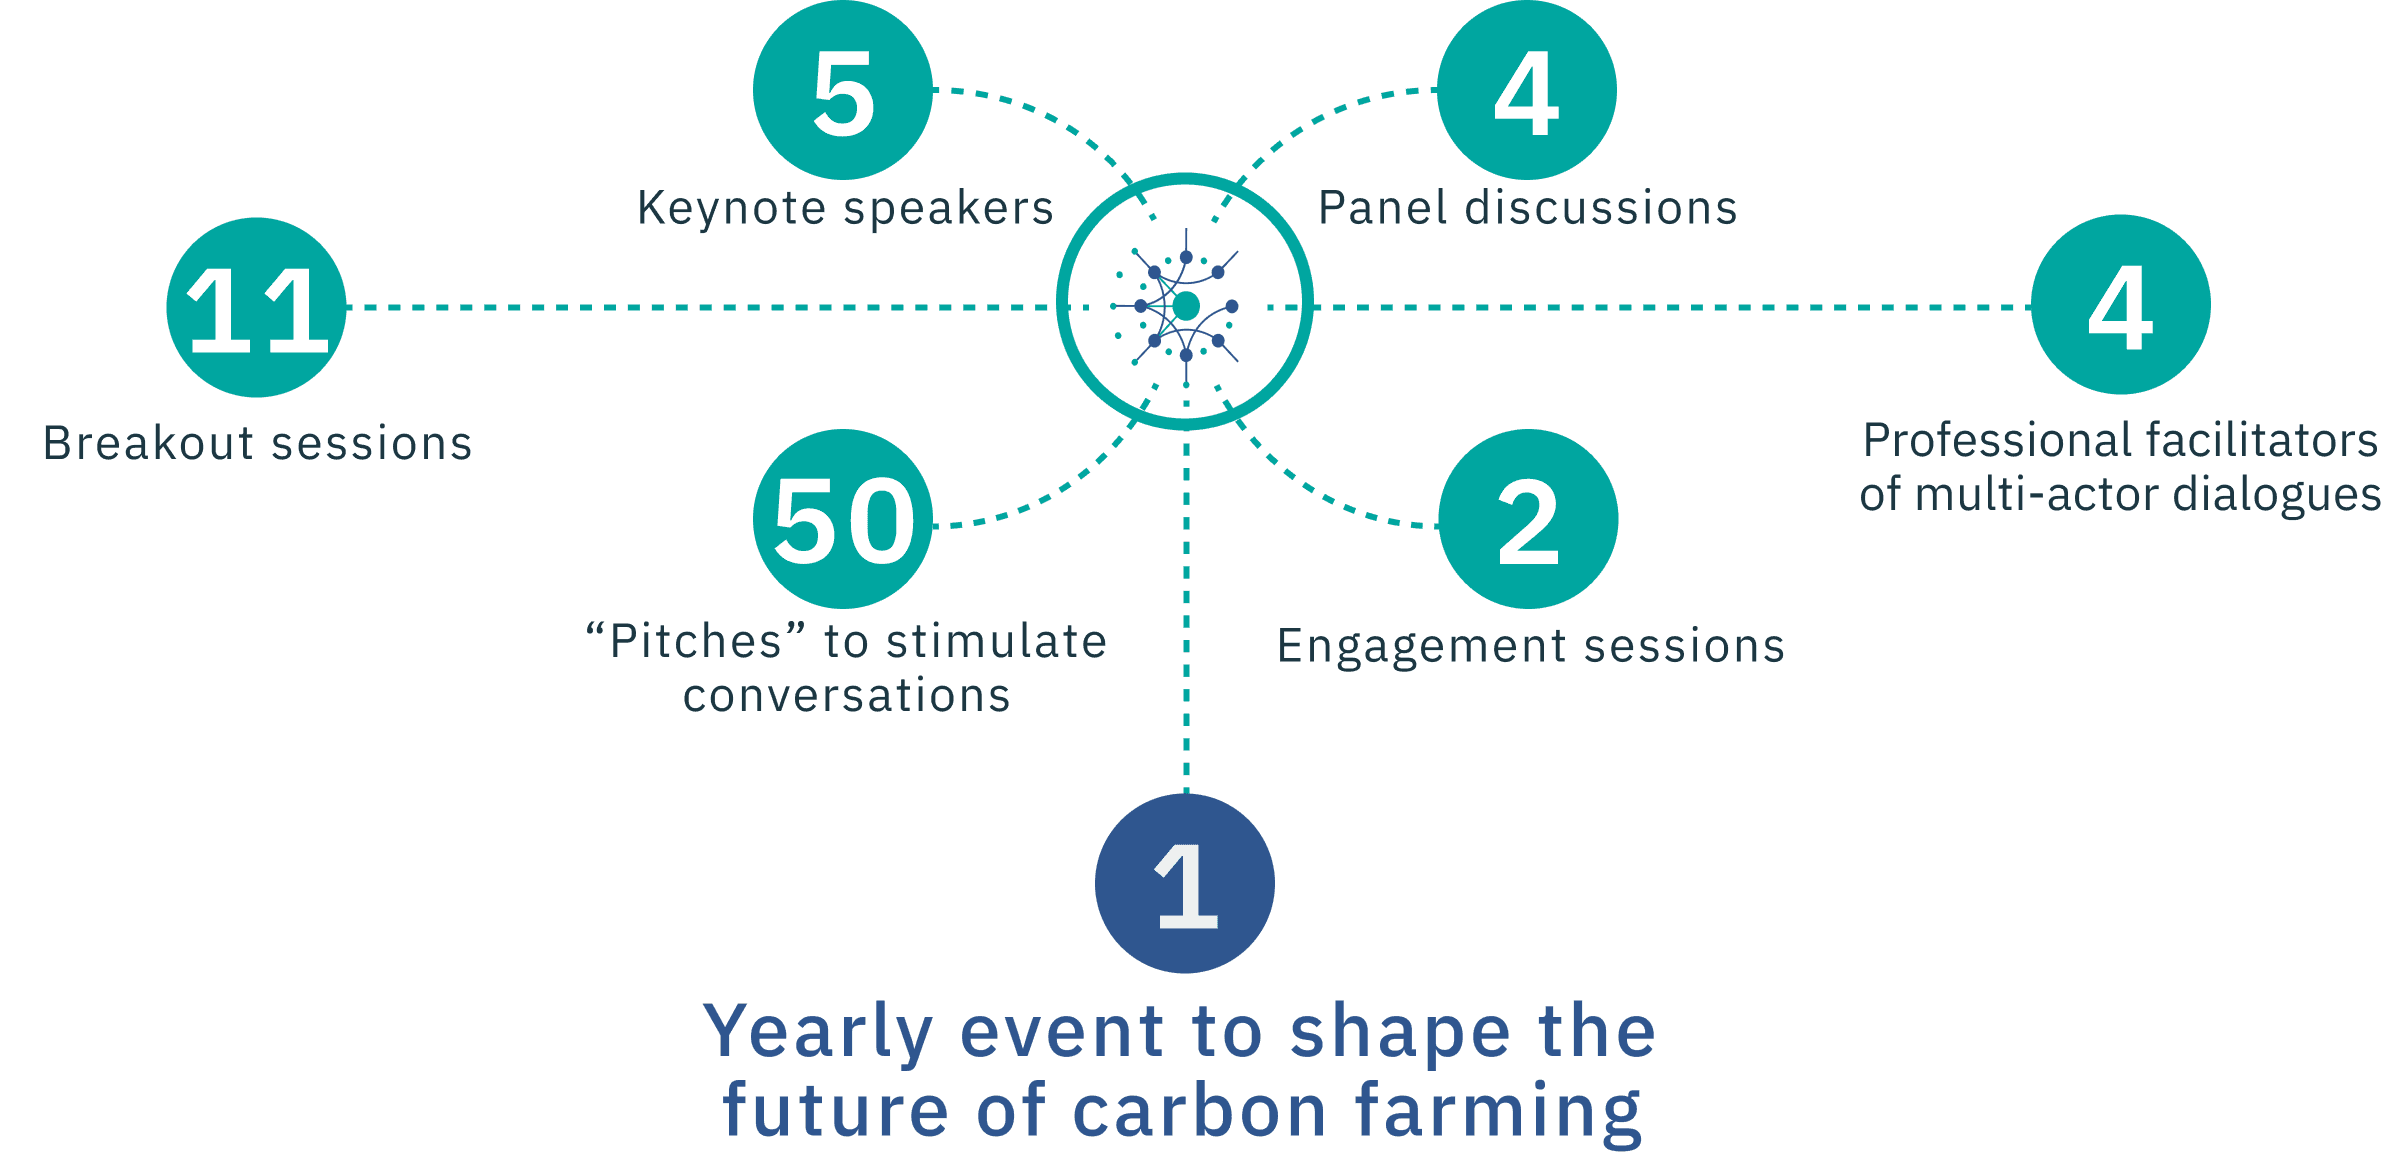 Summit in numbers